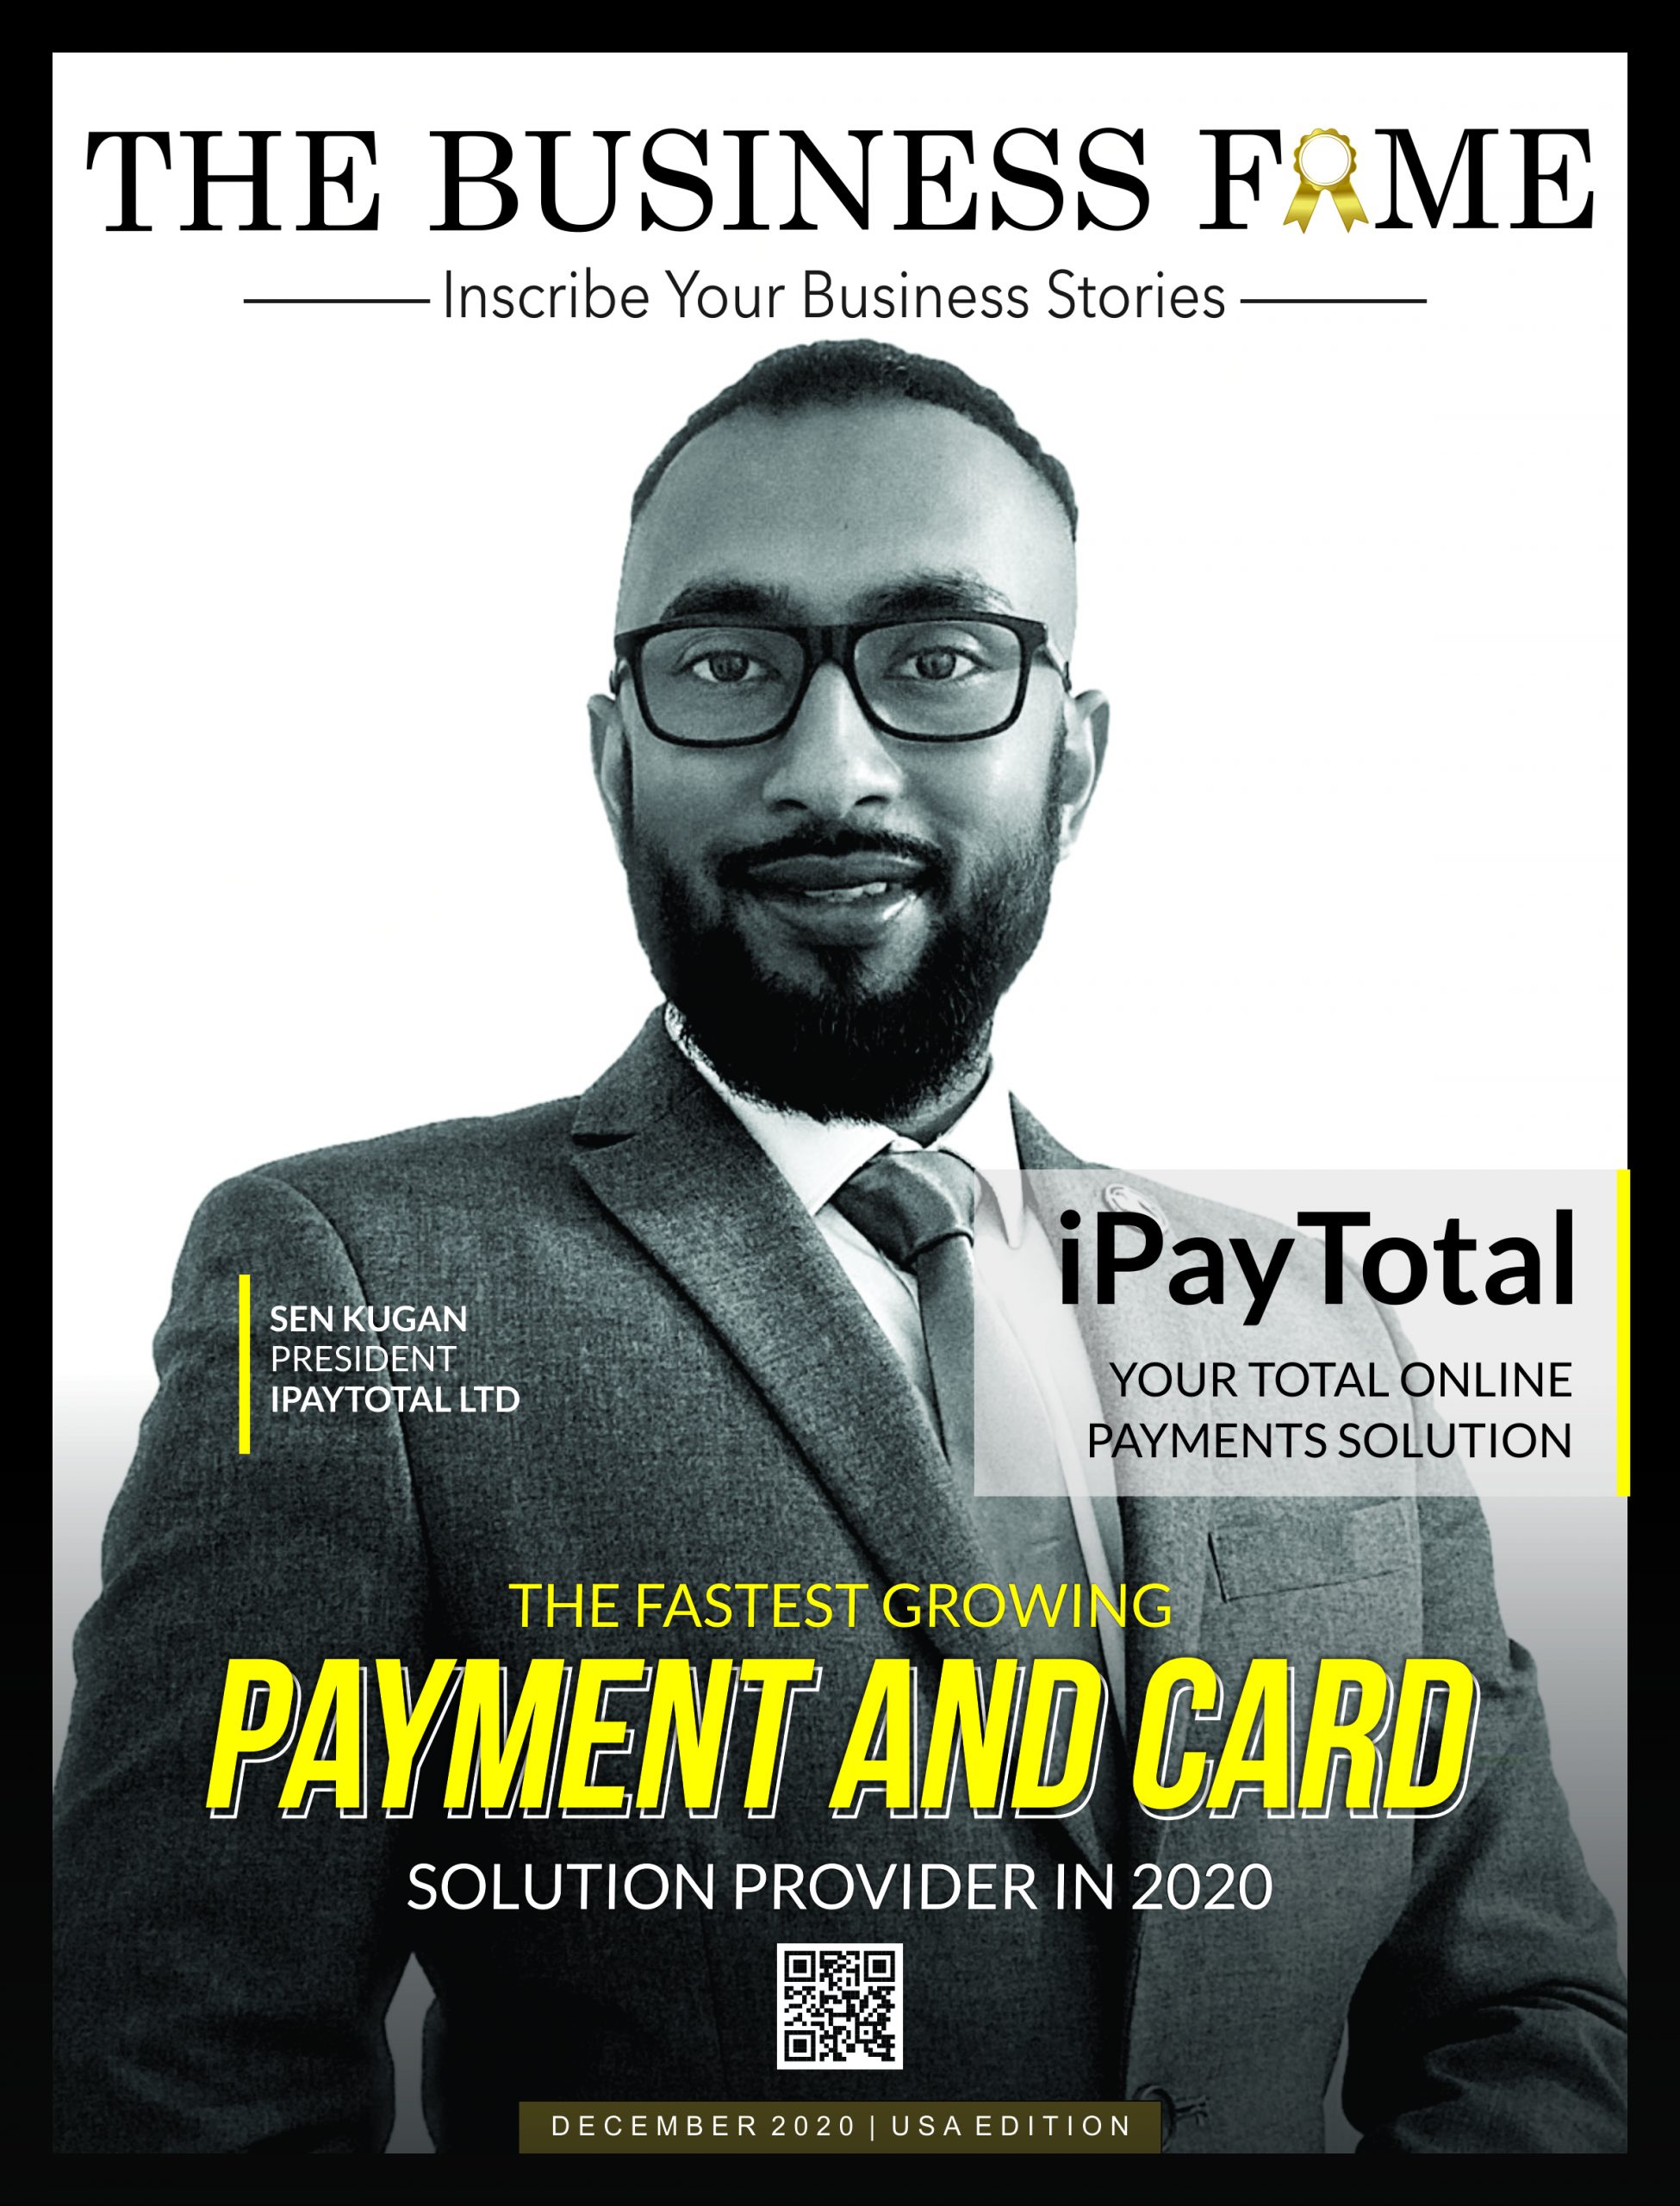 The Business Fame | The Fastest Growing Payment & Card Solution Provider In 2020